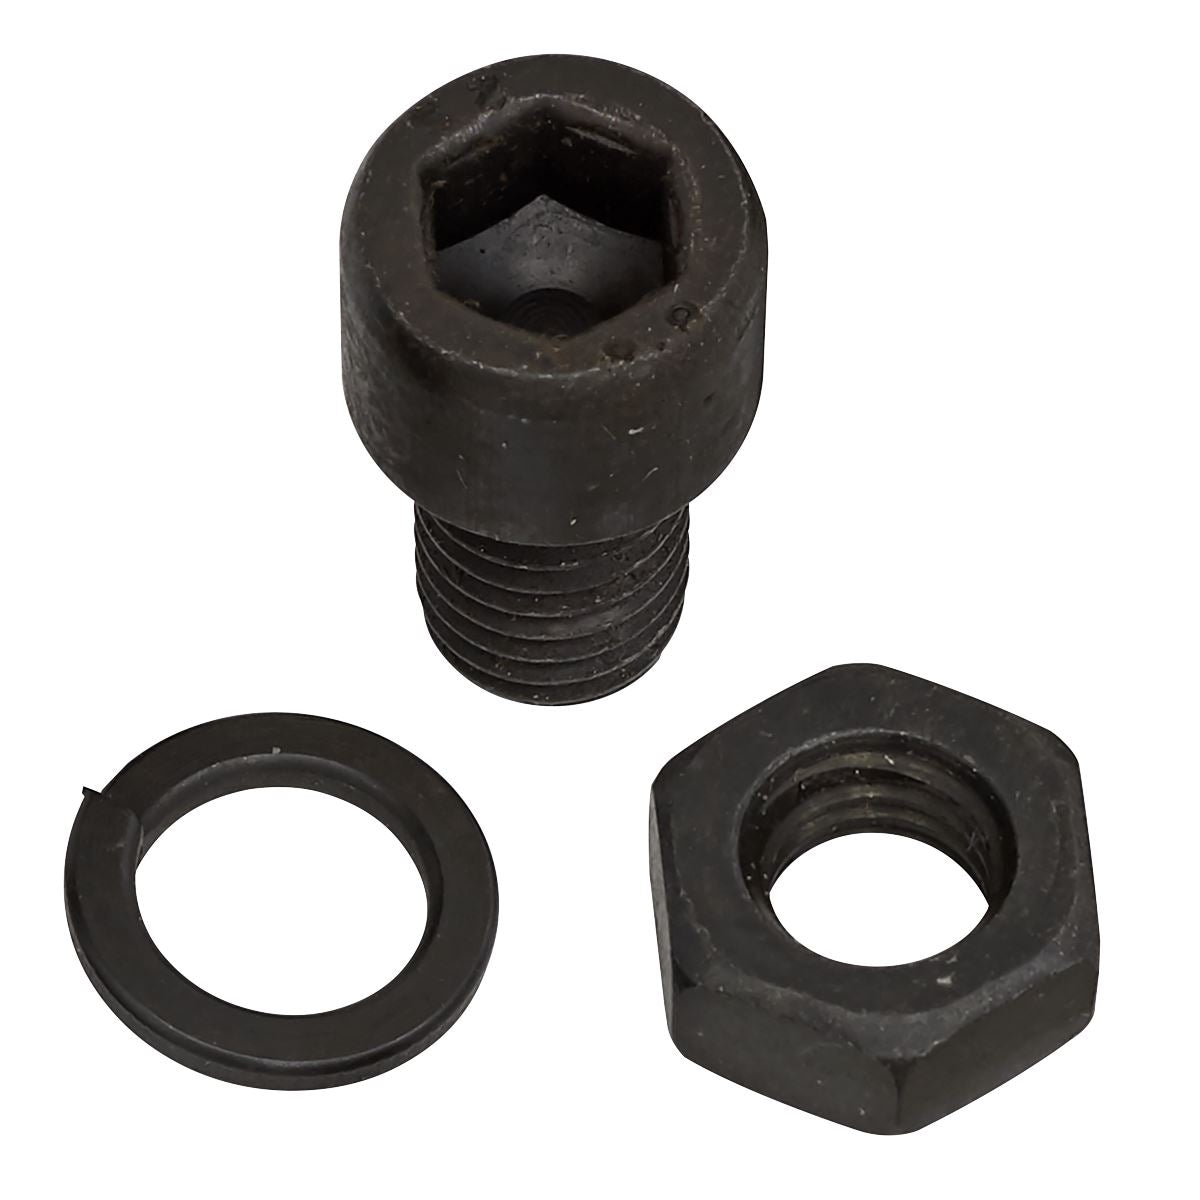 Worksafe by Sealey Spare Bolt and Nut 12mm for K2FC Floor Scraper